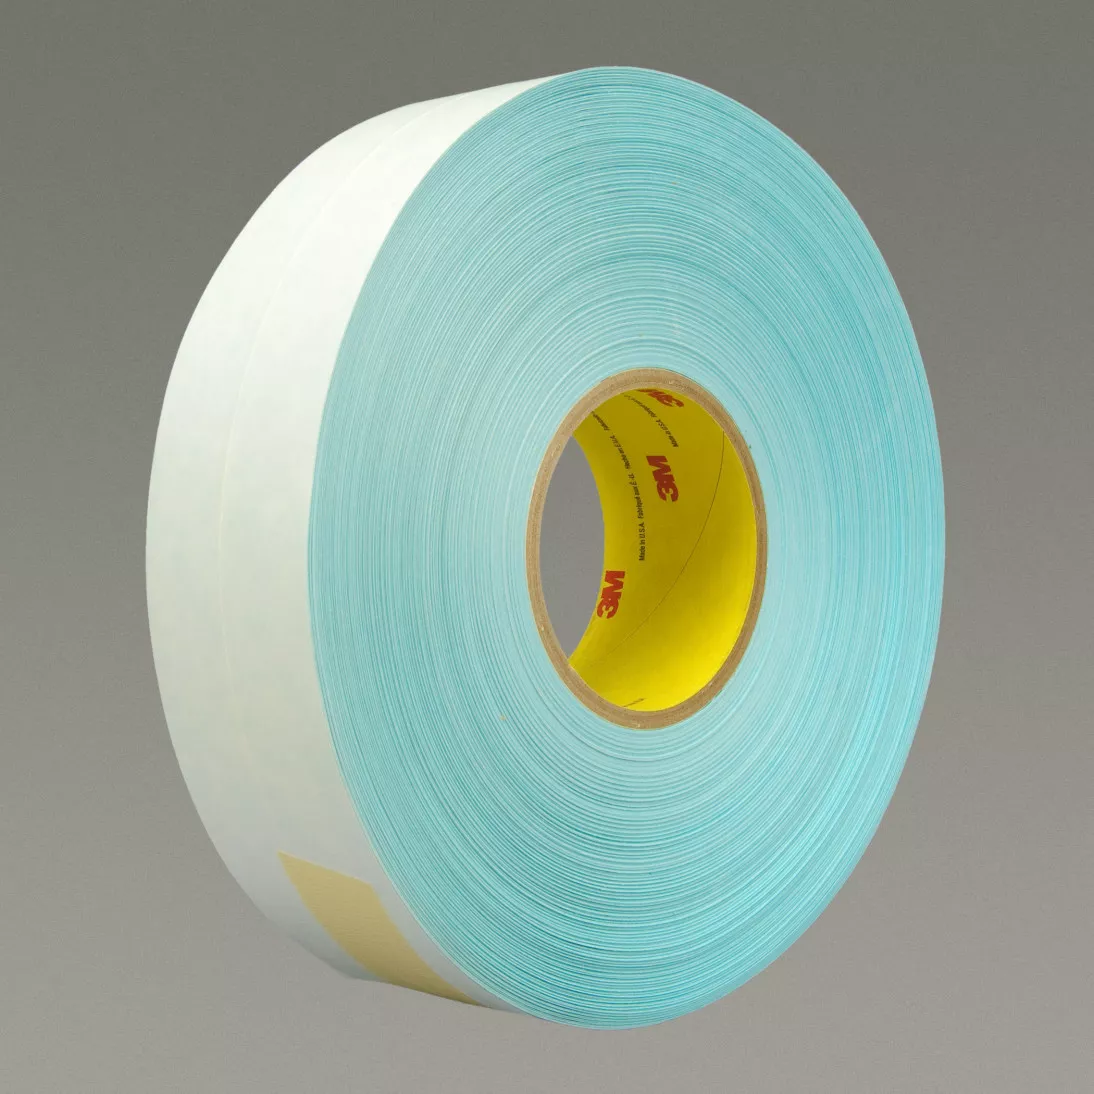 3M™ Printable Repulpable Single Coated Splicing Tape 9103, Blue, 48 mm x
55 m, 4.1 mil, 24 rolls per case